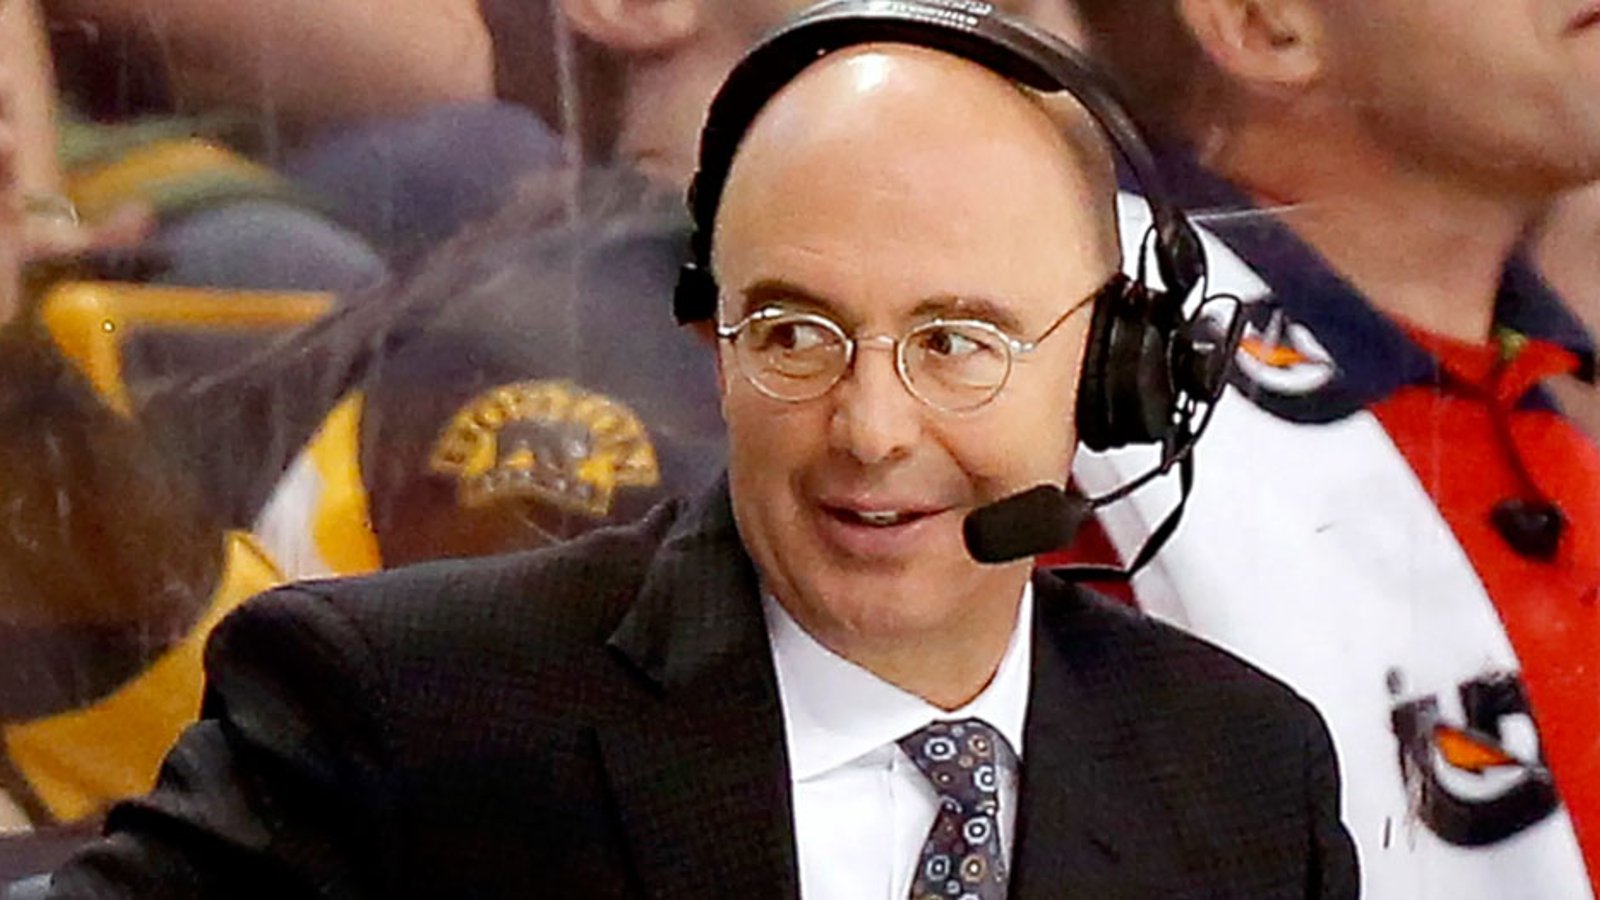 Pierre McGuire removed from his position with NBC!